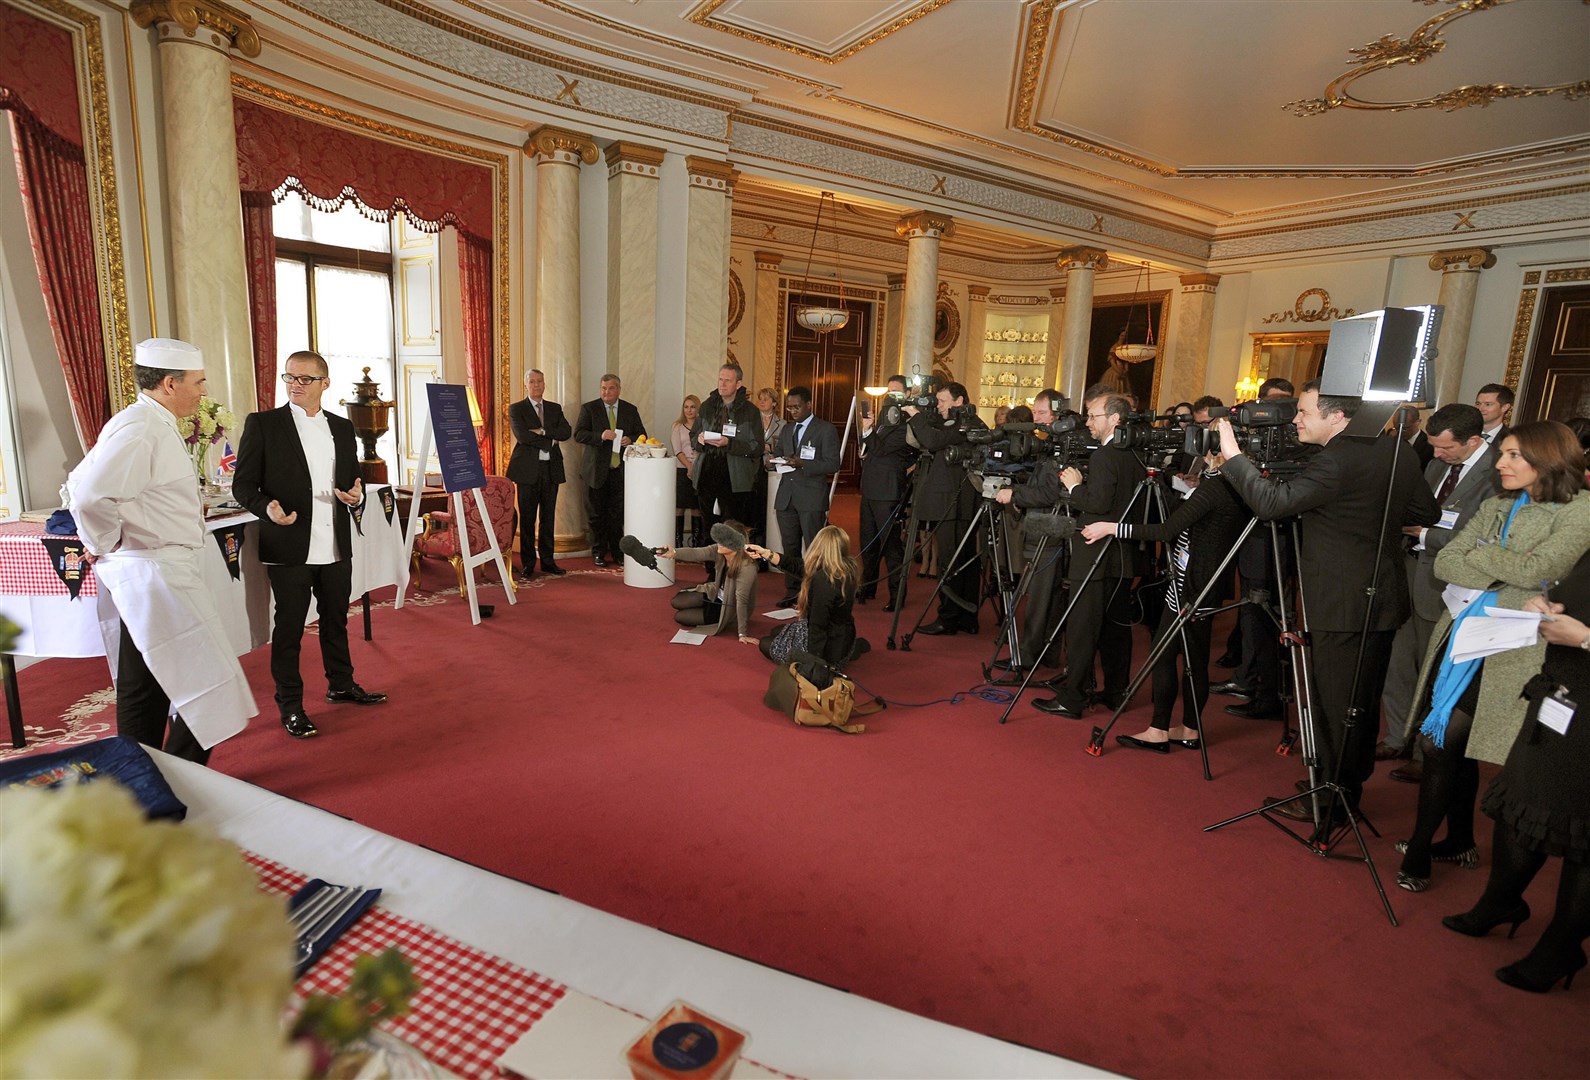 Heston Blumenthal gave a presentation of his Diamond Jubilee Concert picnic in the Bow Room in 2012 (John Stillwell/PA)